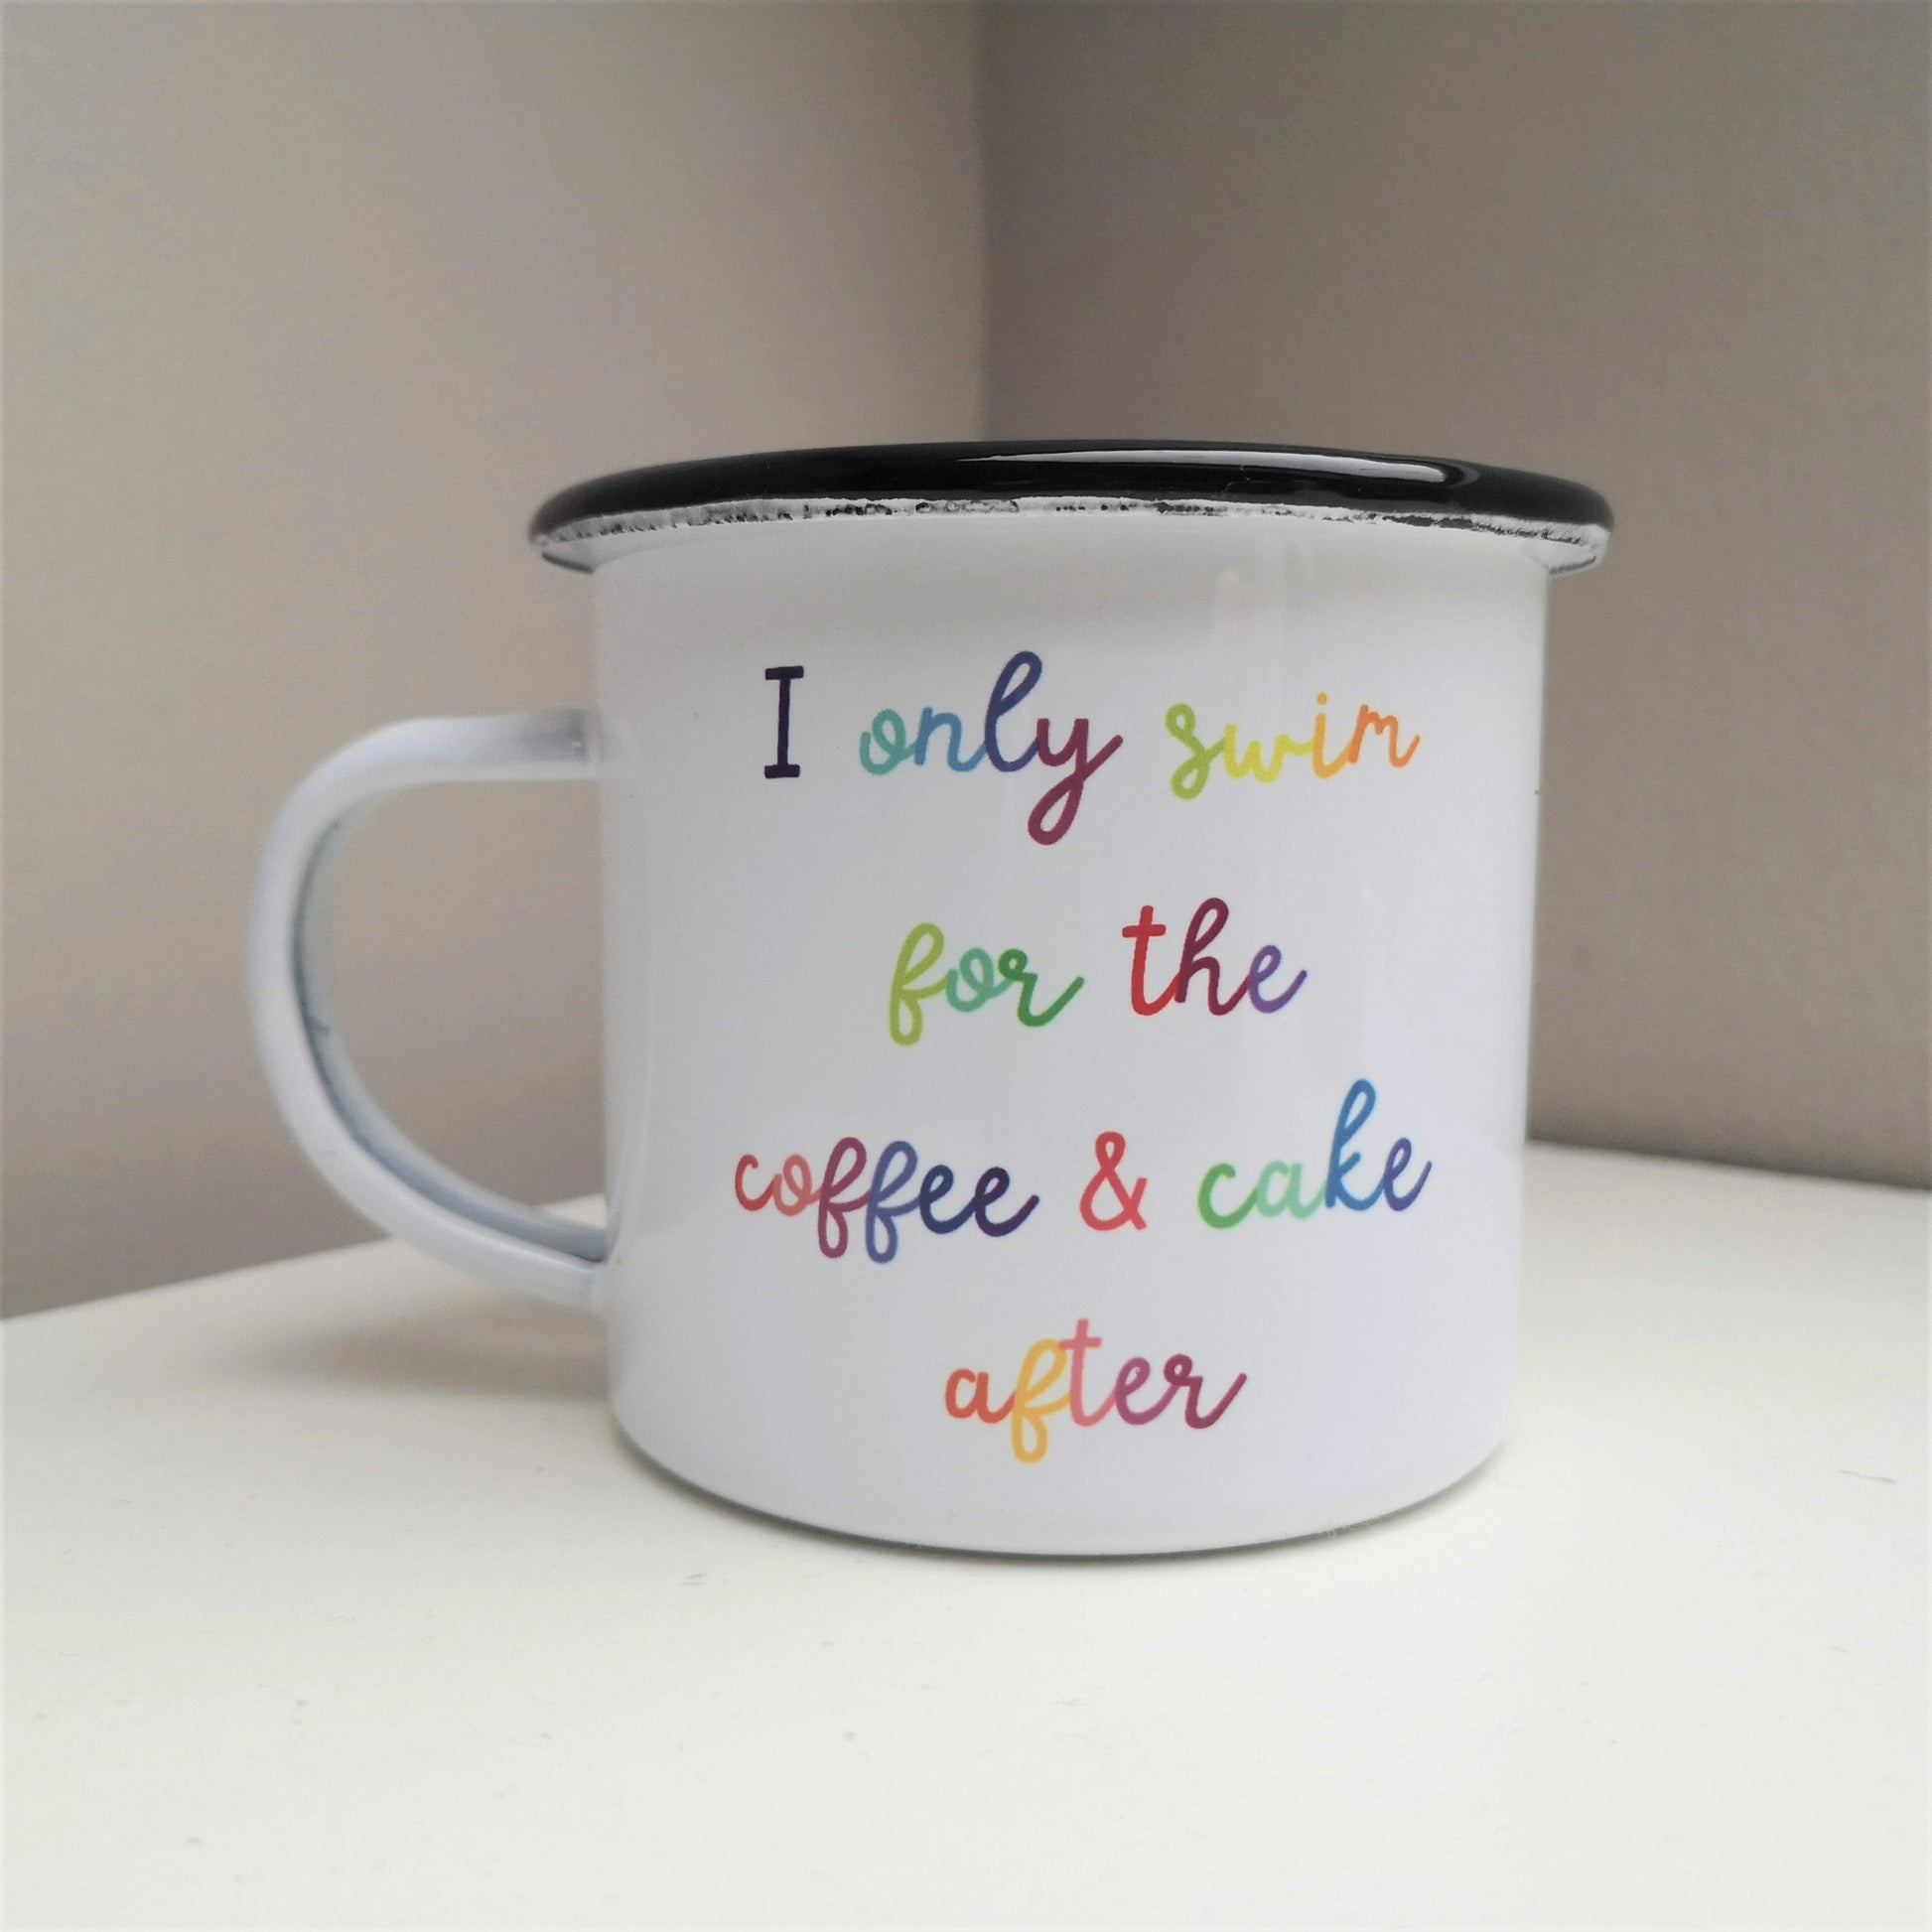 A steel enamel cup for your after-swim tipples, with a choice of 3 confessions in colourful rainbow text.  This mug has the following excuse - I only swim for the coffee & cake after.  